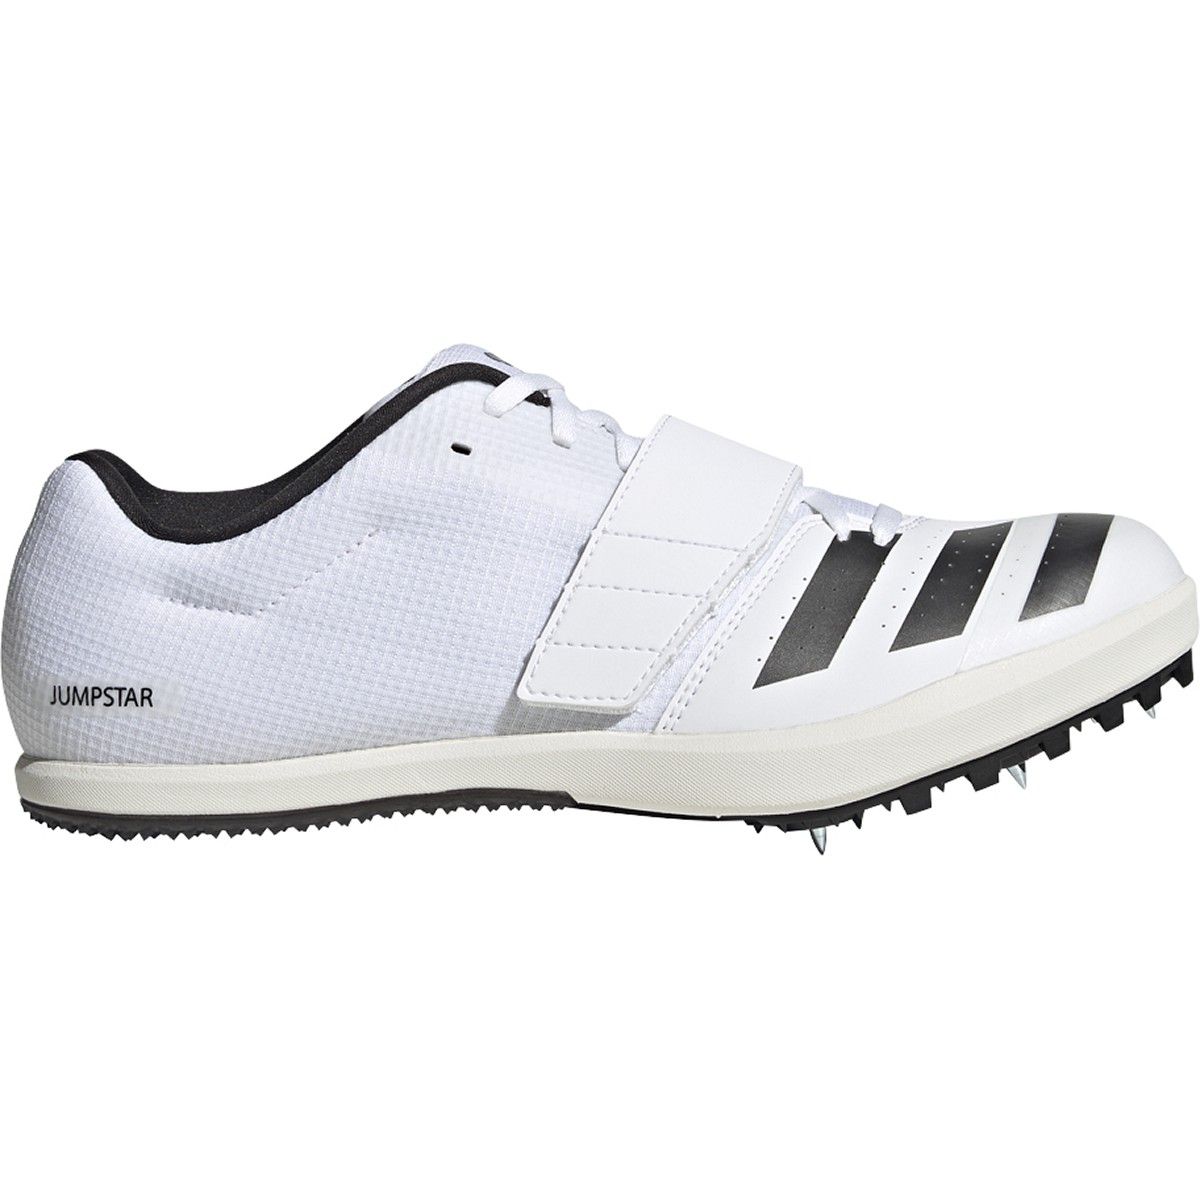 Maryanne Jones insondable perspectiva adidas Jumpstar Mens Track and Field Spike Shoes GX6684